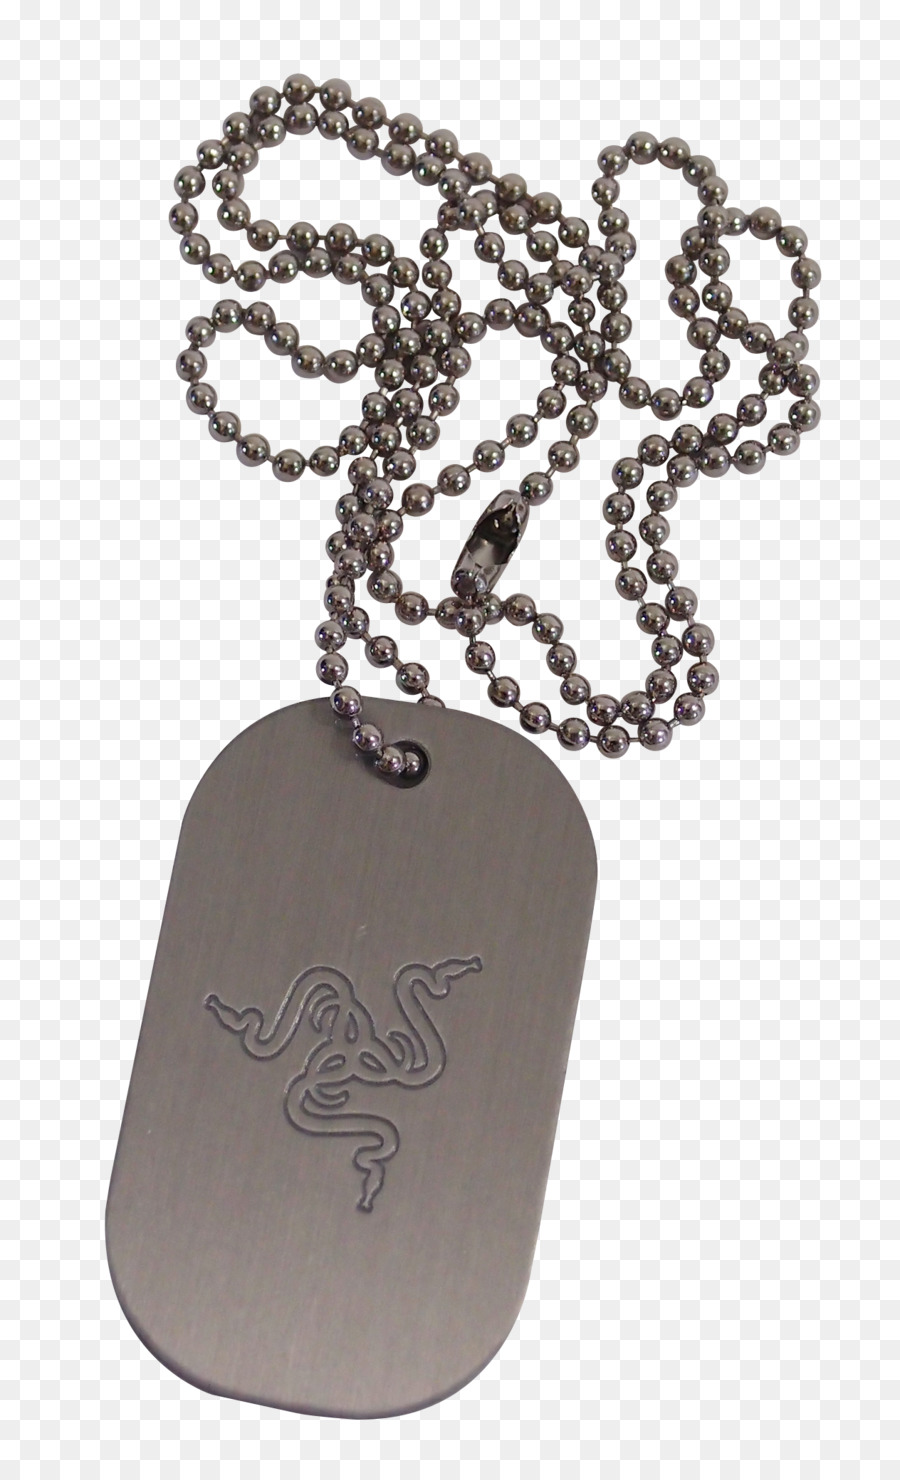 Dog tag Computer keyboard Razer Inc. Headphones Computer mouse - tags png download - 1264*2076 - Free Transparent Dog Tag png Download.